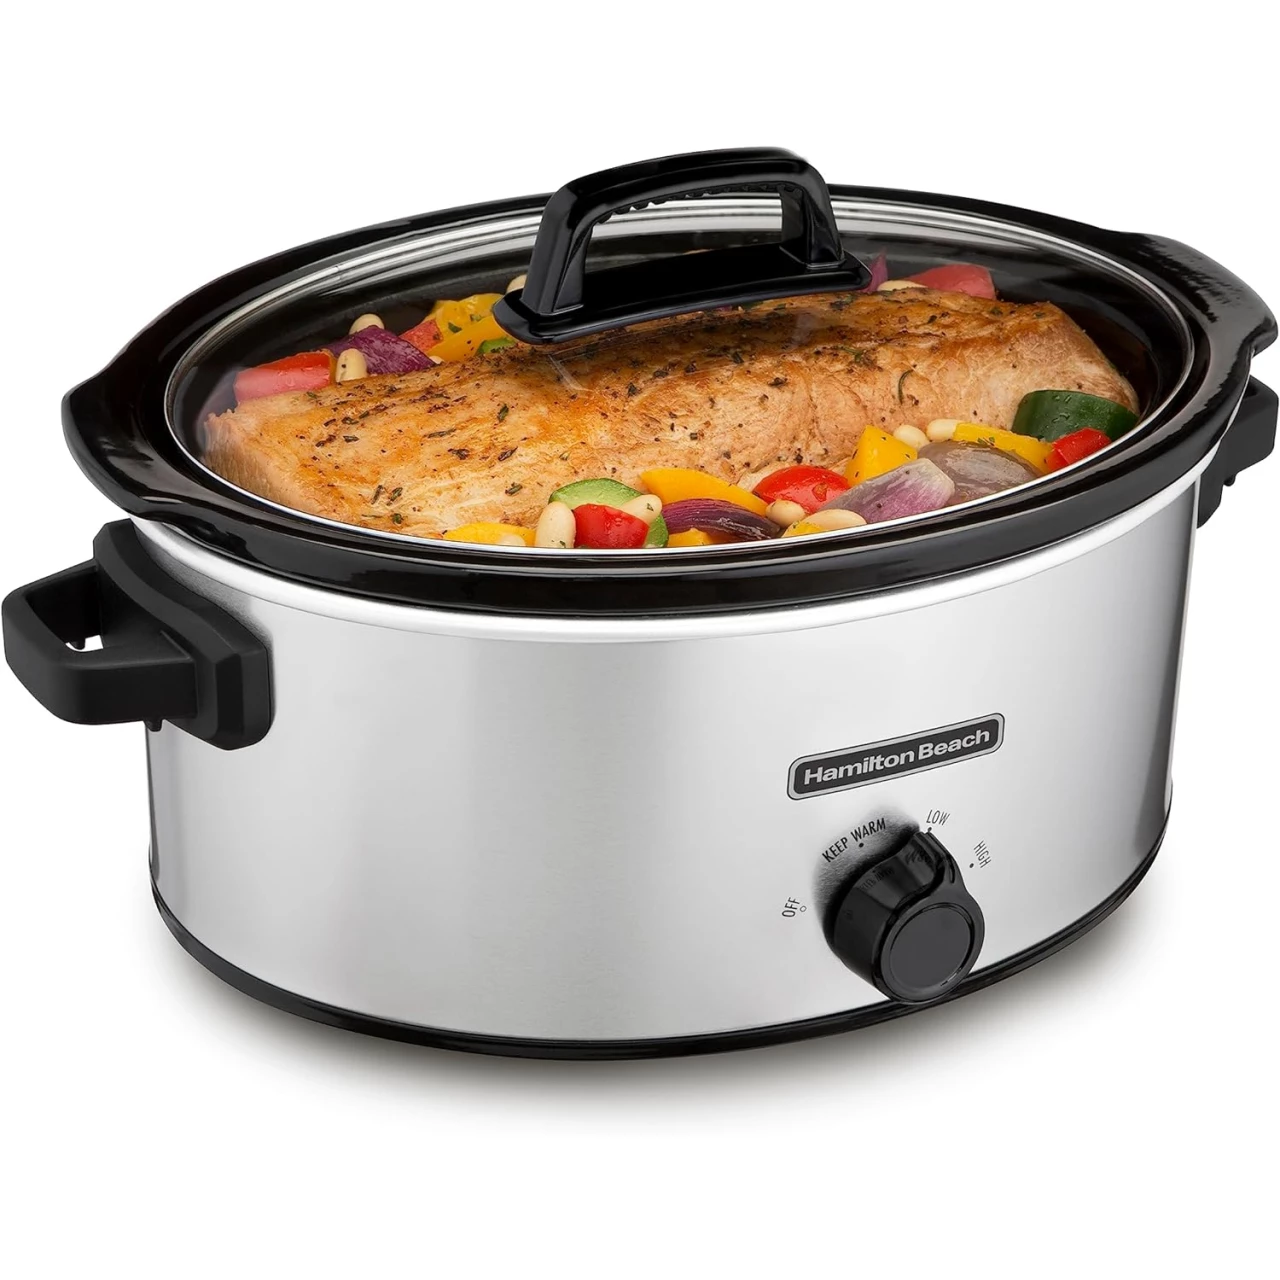 Hamilton Beach 6-Quart Slow Cooker with 3 Cooking Settings, Dishwasher-Safe Stoneware Crock &amp; Glass Lid, Silver (33665)